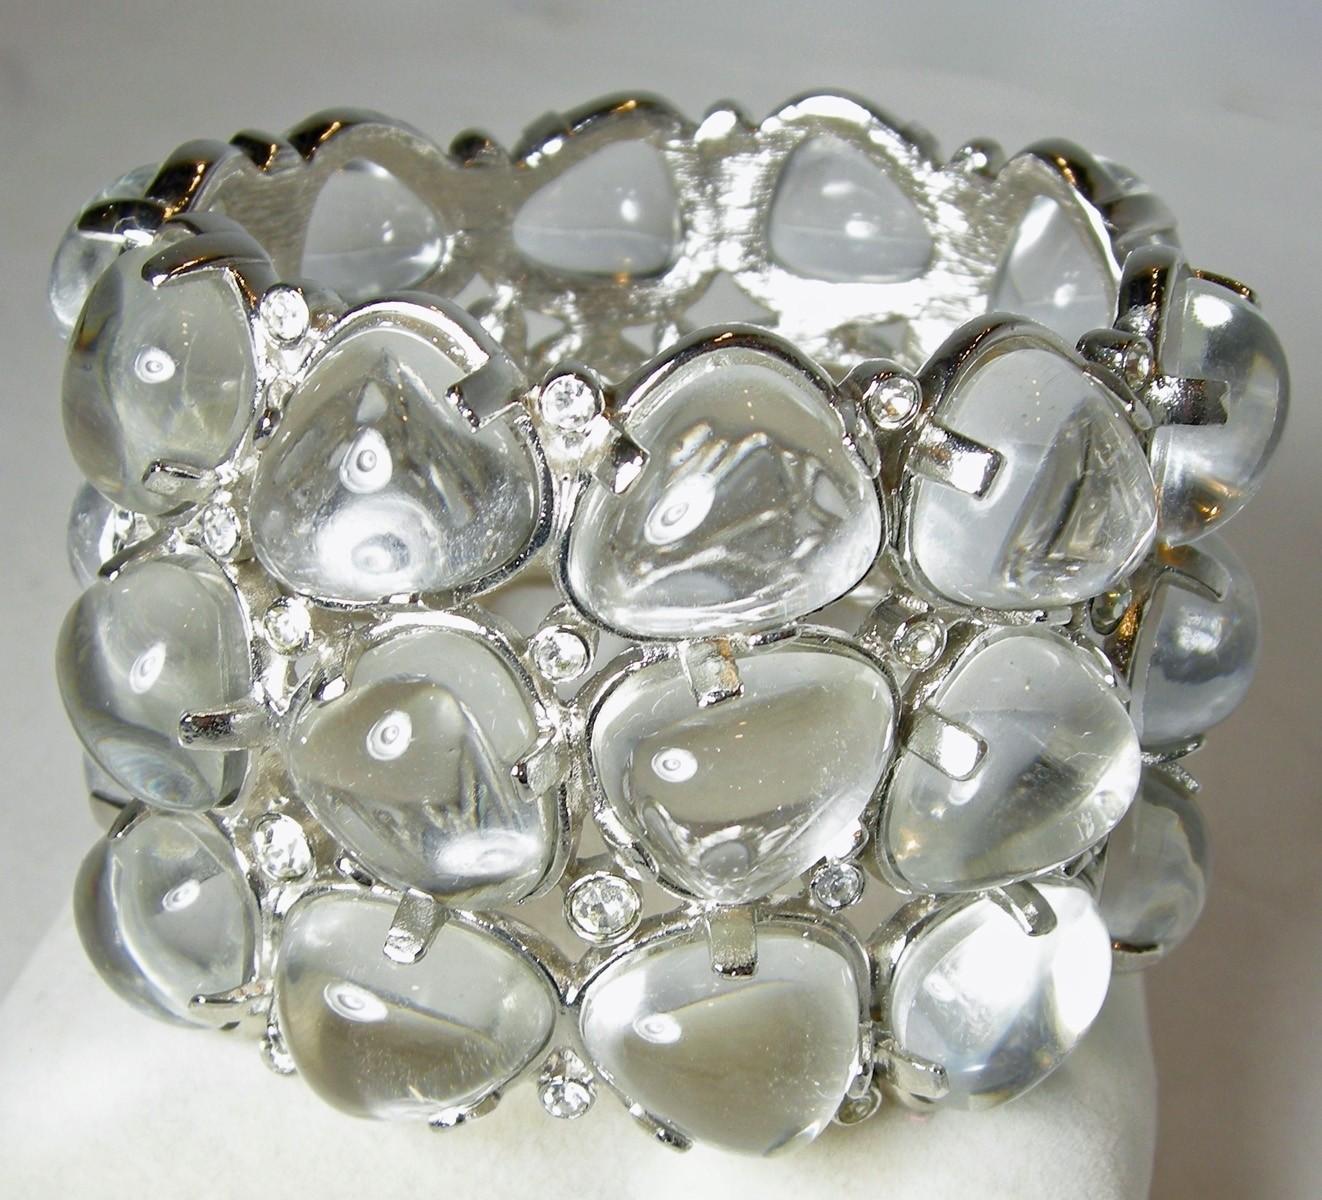 This is one of the KJL most desired cuffs.  This KJL cuff bracelet was designed with rows of large clear Lucite stones accentuated with sparkling crystals and made with a nickel-free silver tone base metal. It can fit up to a 9” wrist and measures